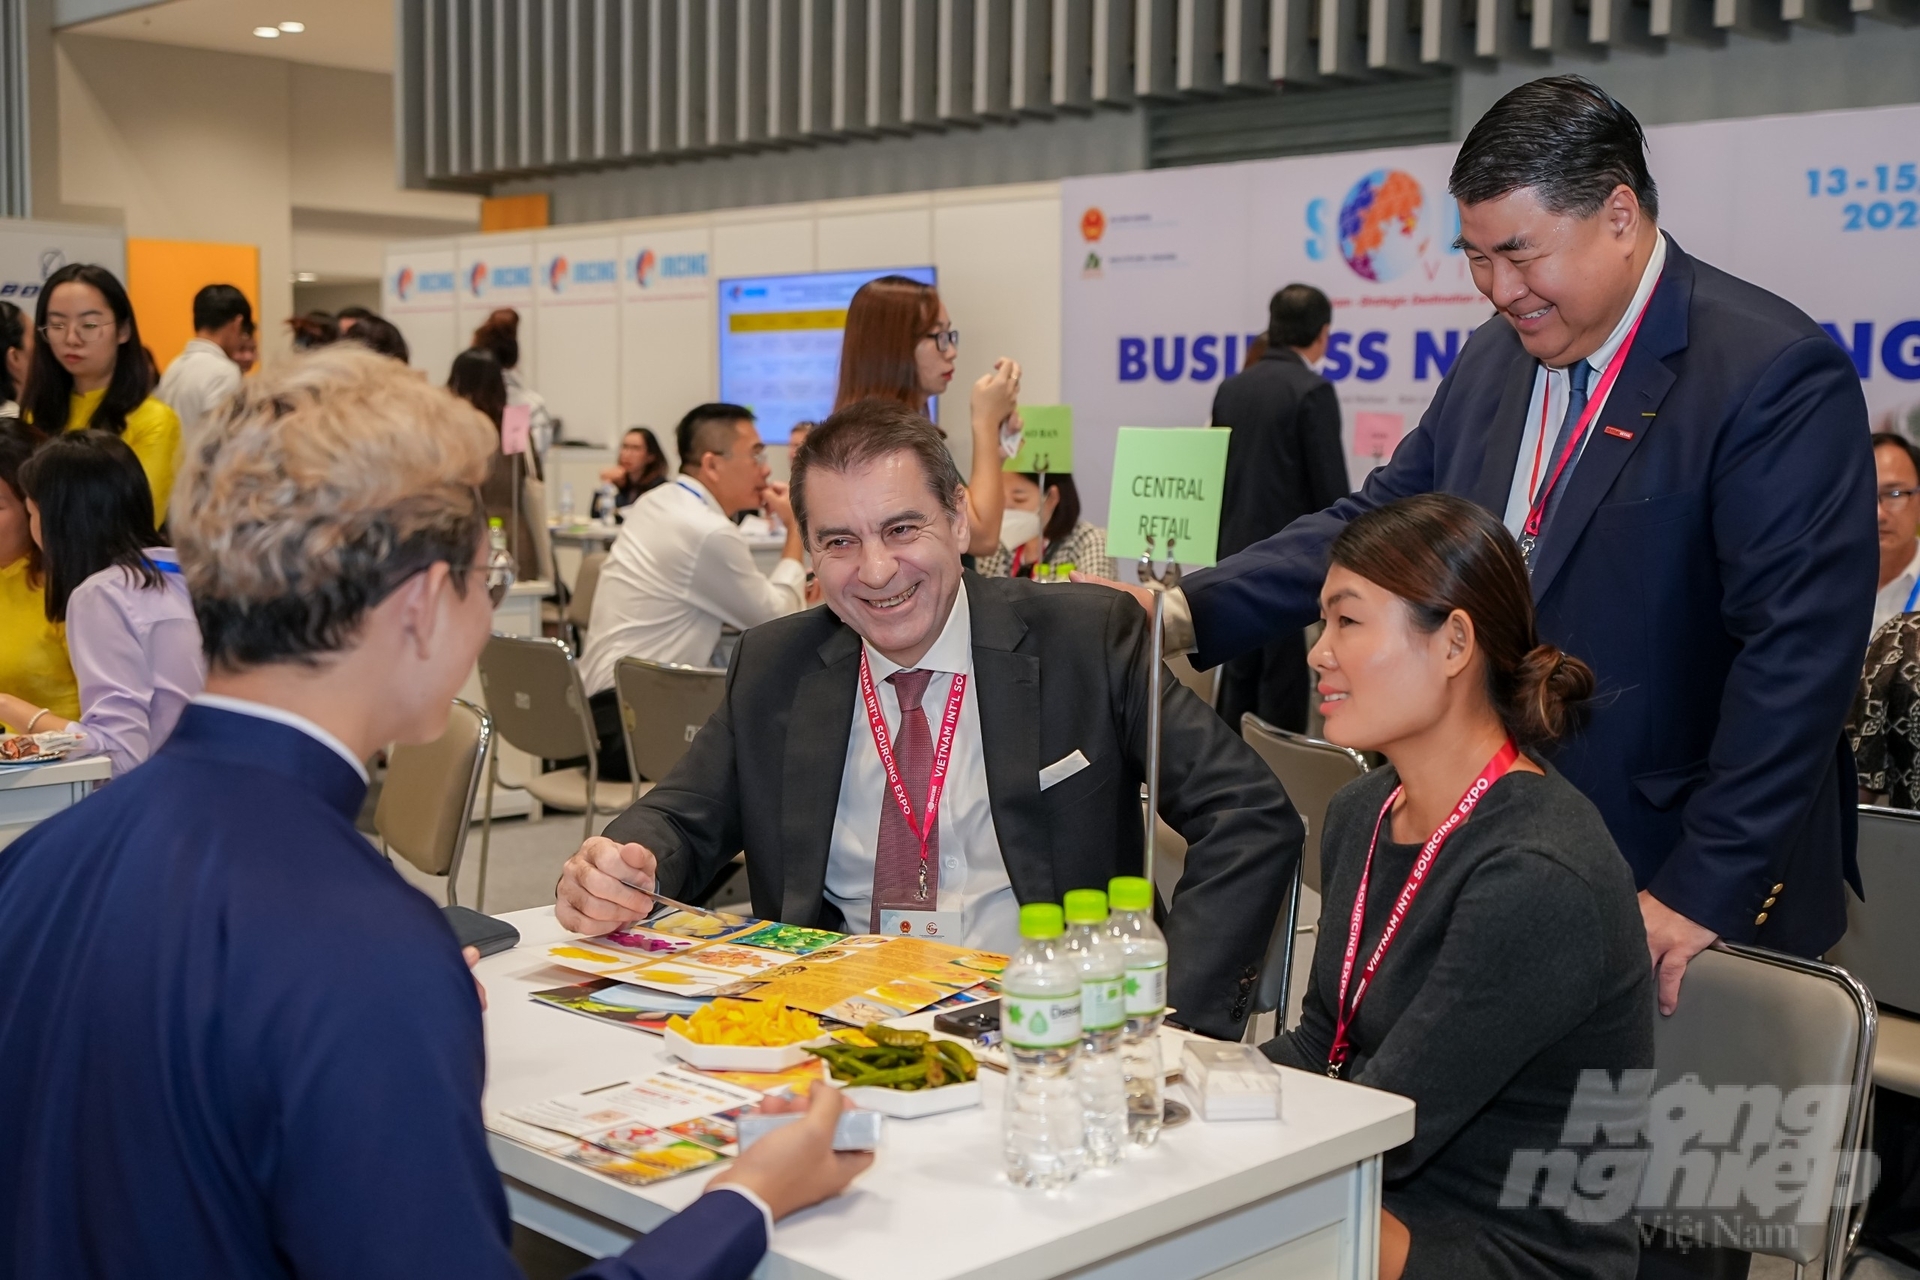 The Central Retail Group is seeking sourcing opportunities at the 2023 Export Forum organized by the Ministry of Industry and Trade and the Ho Chi Minh City People's Committee. The Group aims to bring Vietnamese agricultural and food products into the supermarket systems in Thailand.